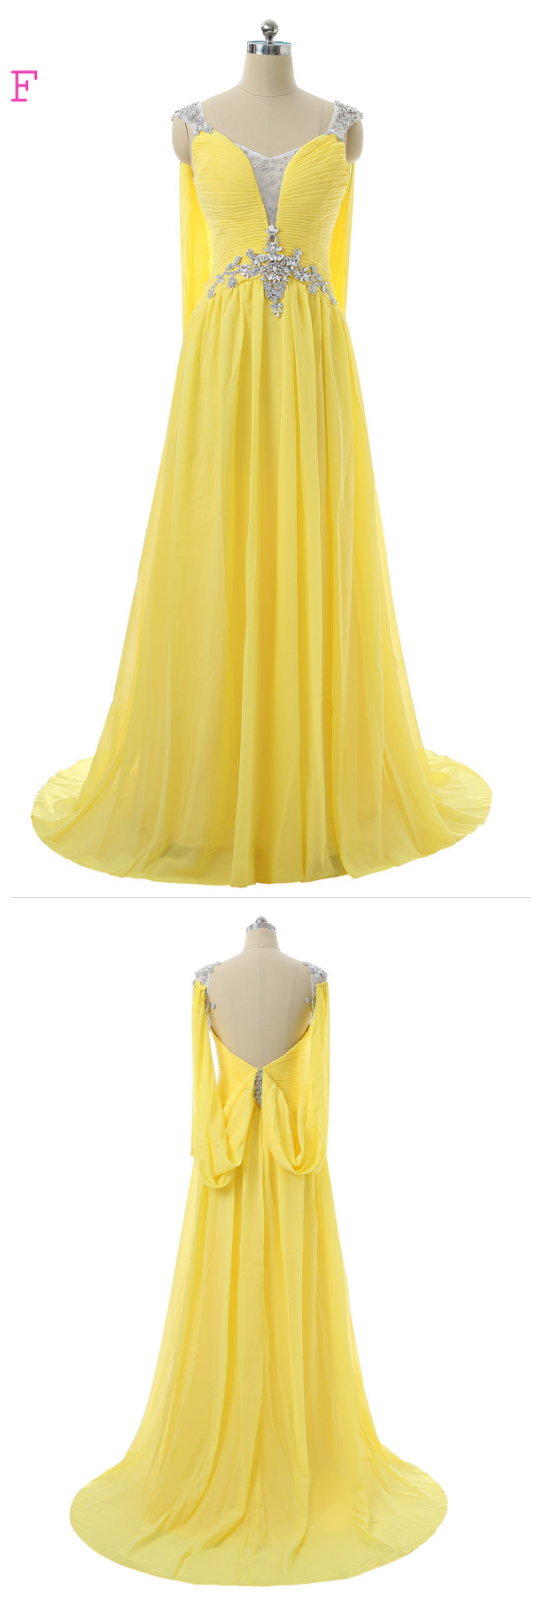 Prom Dresses ,a-line Cap Sleeves Chiffon Crystals Open Back Women Long Prom Gown ,evening Dresses Robe De Soiree